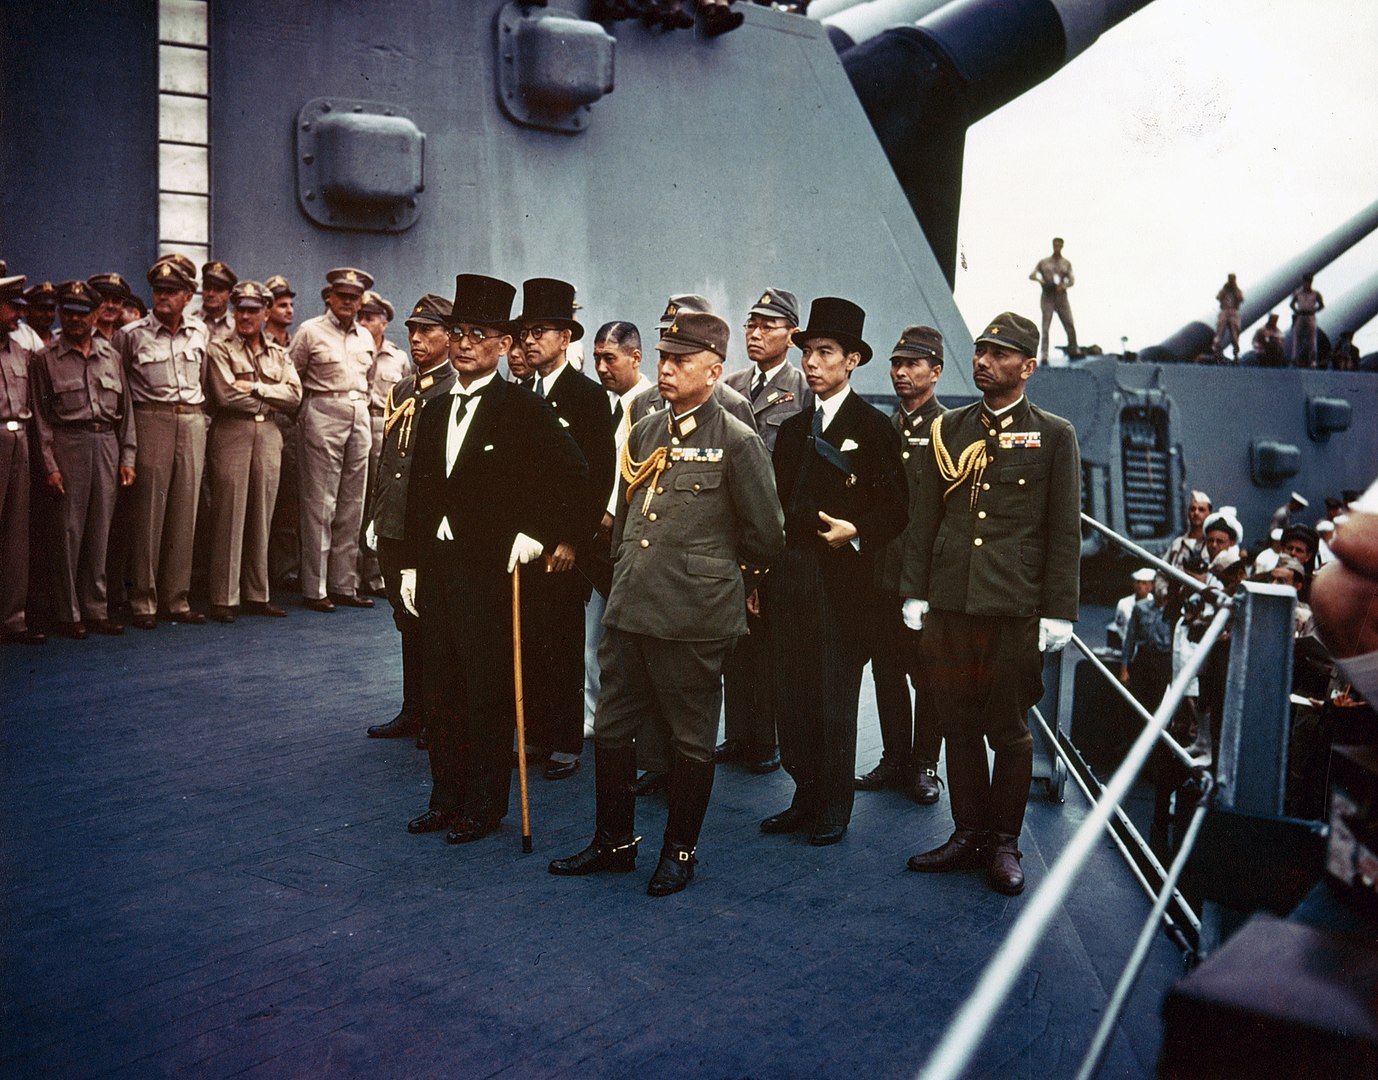 Representatives of the Empire of Japan stand aboard the USS Missouri.